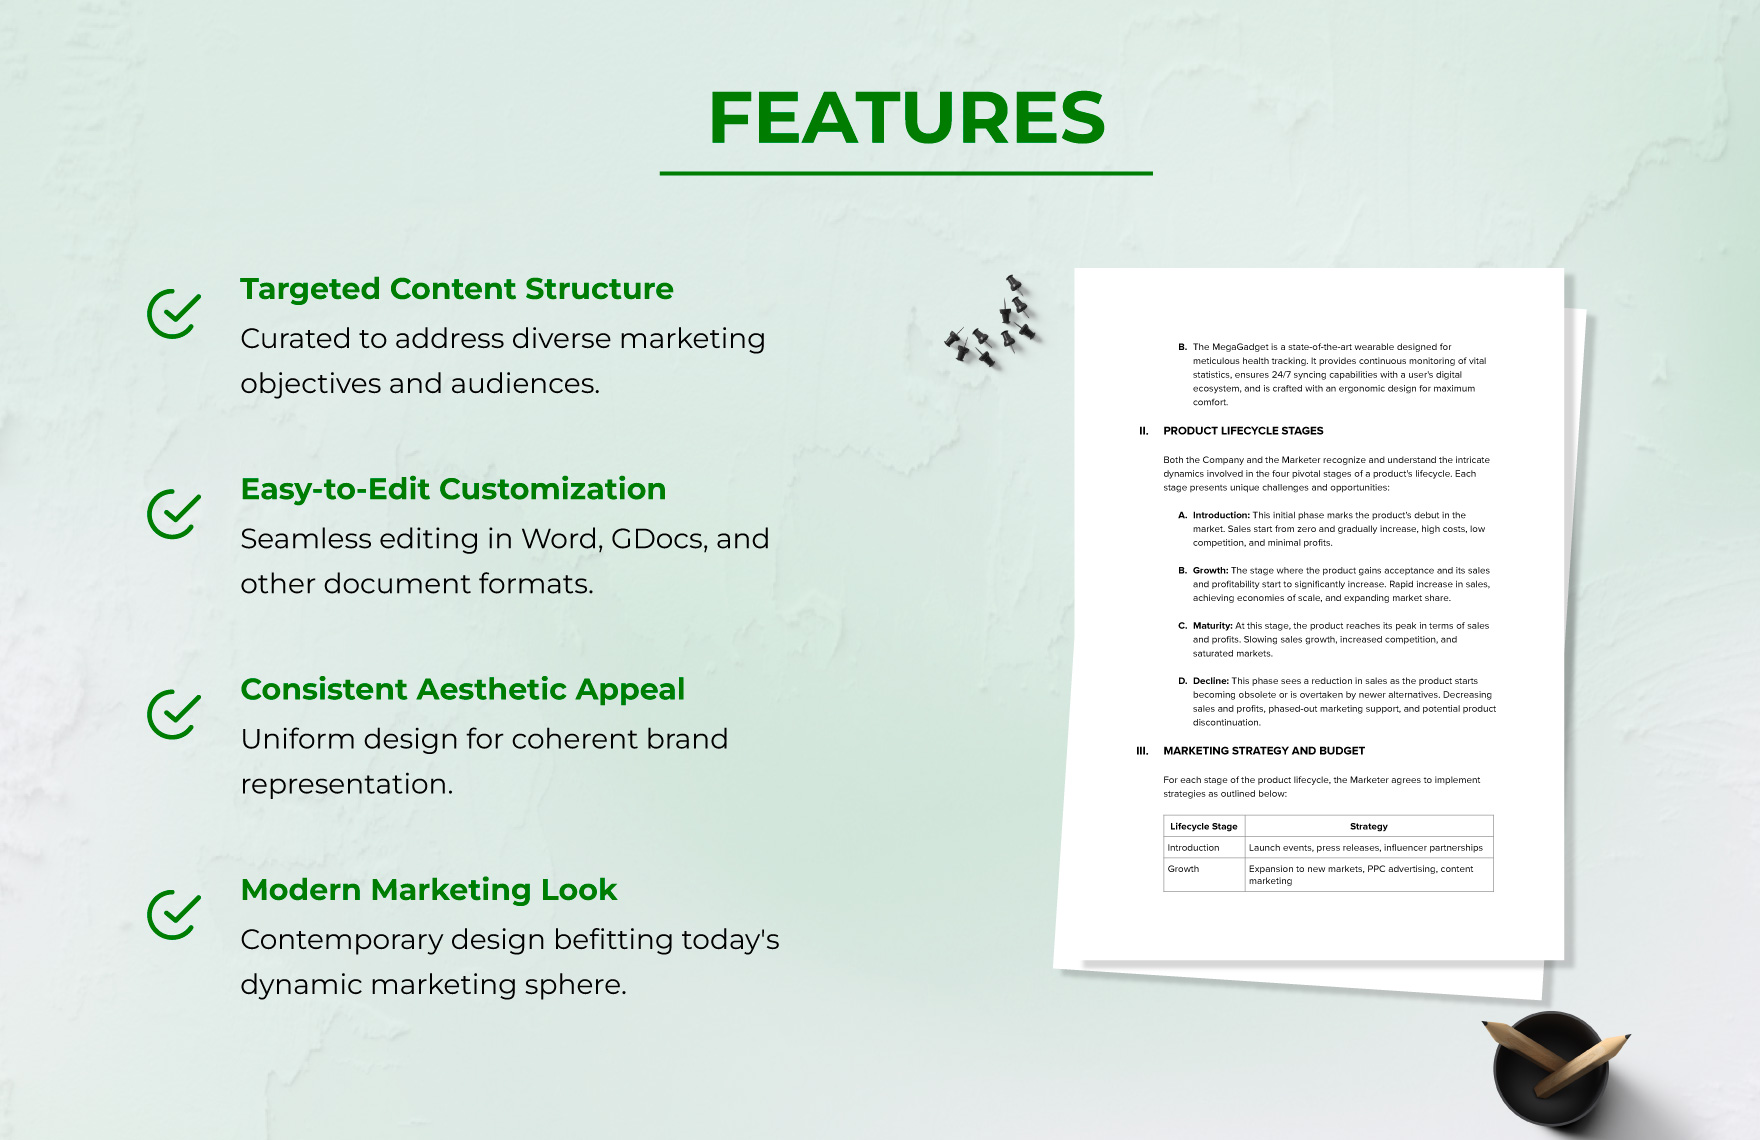 Marketing Product Lifecycle Contract Template